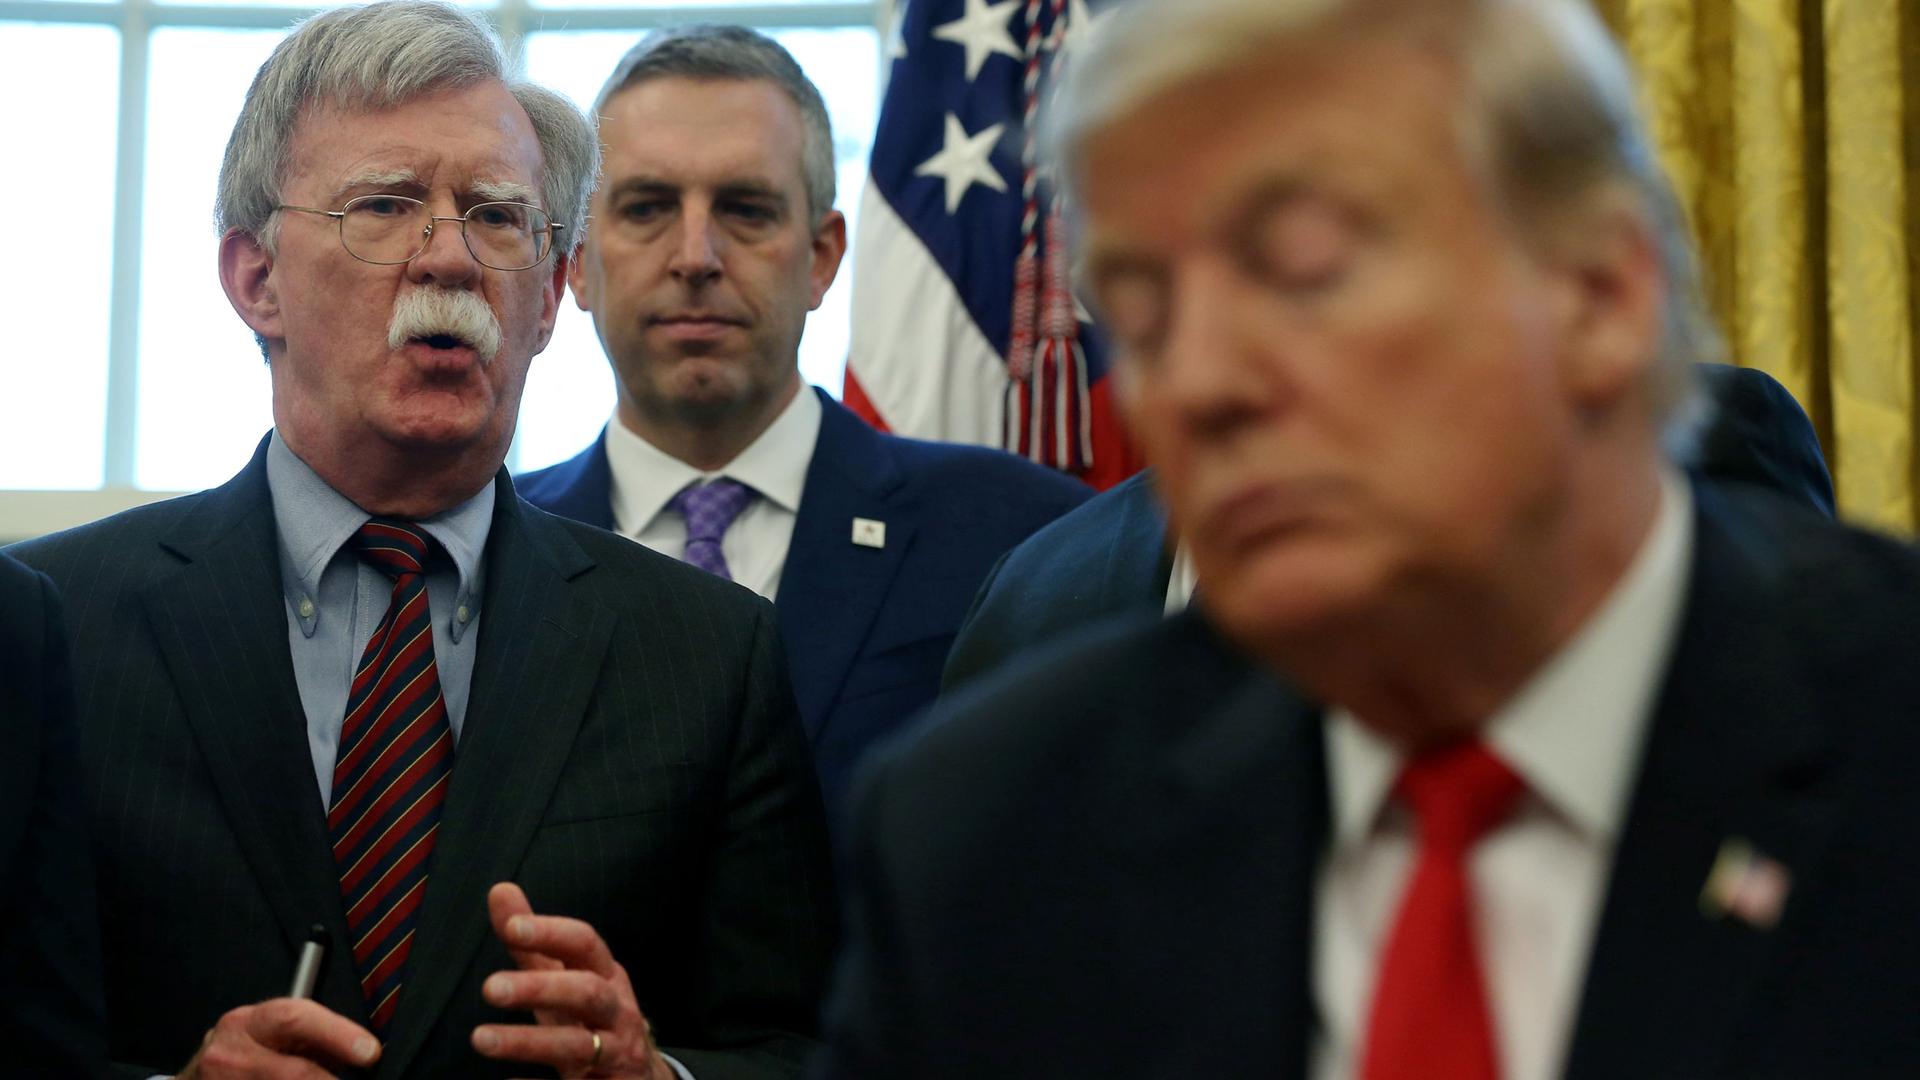 John Bolton is shown speaking in distance with US President Donald Trump in the nearground in soft focus.